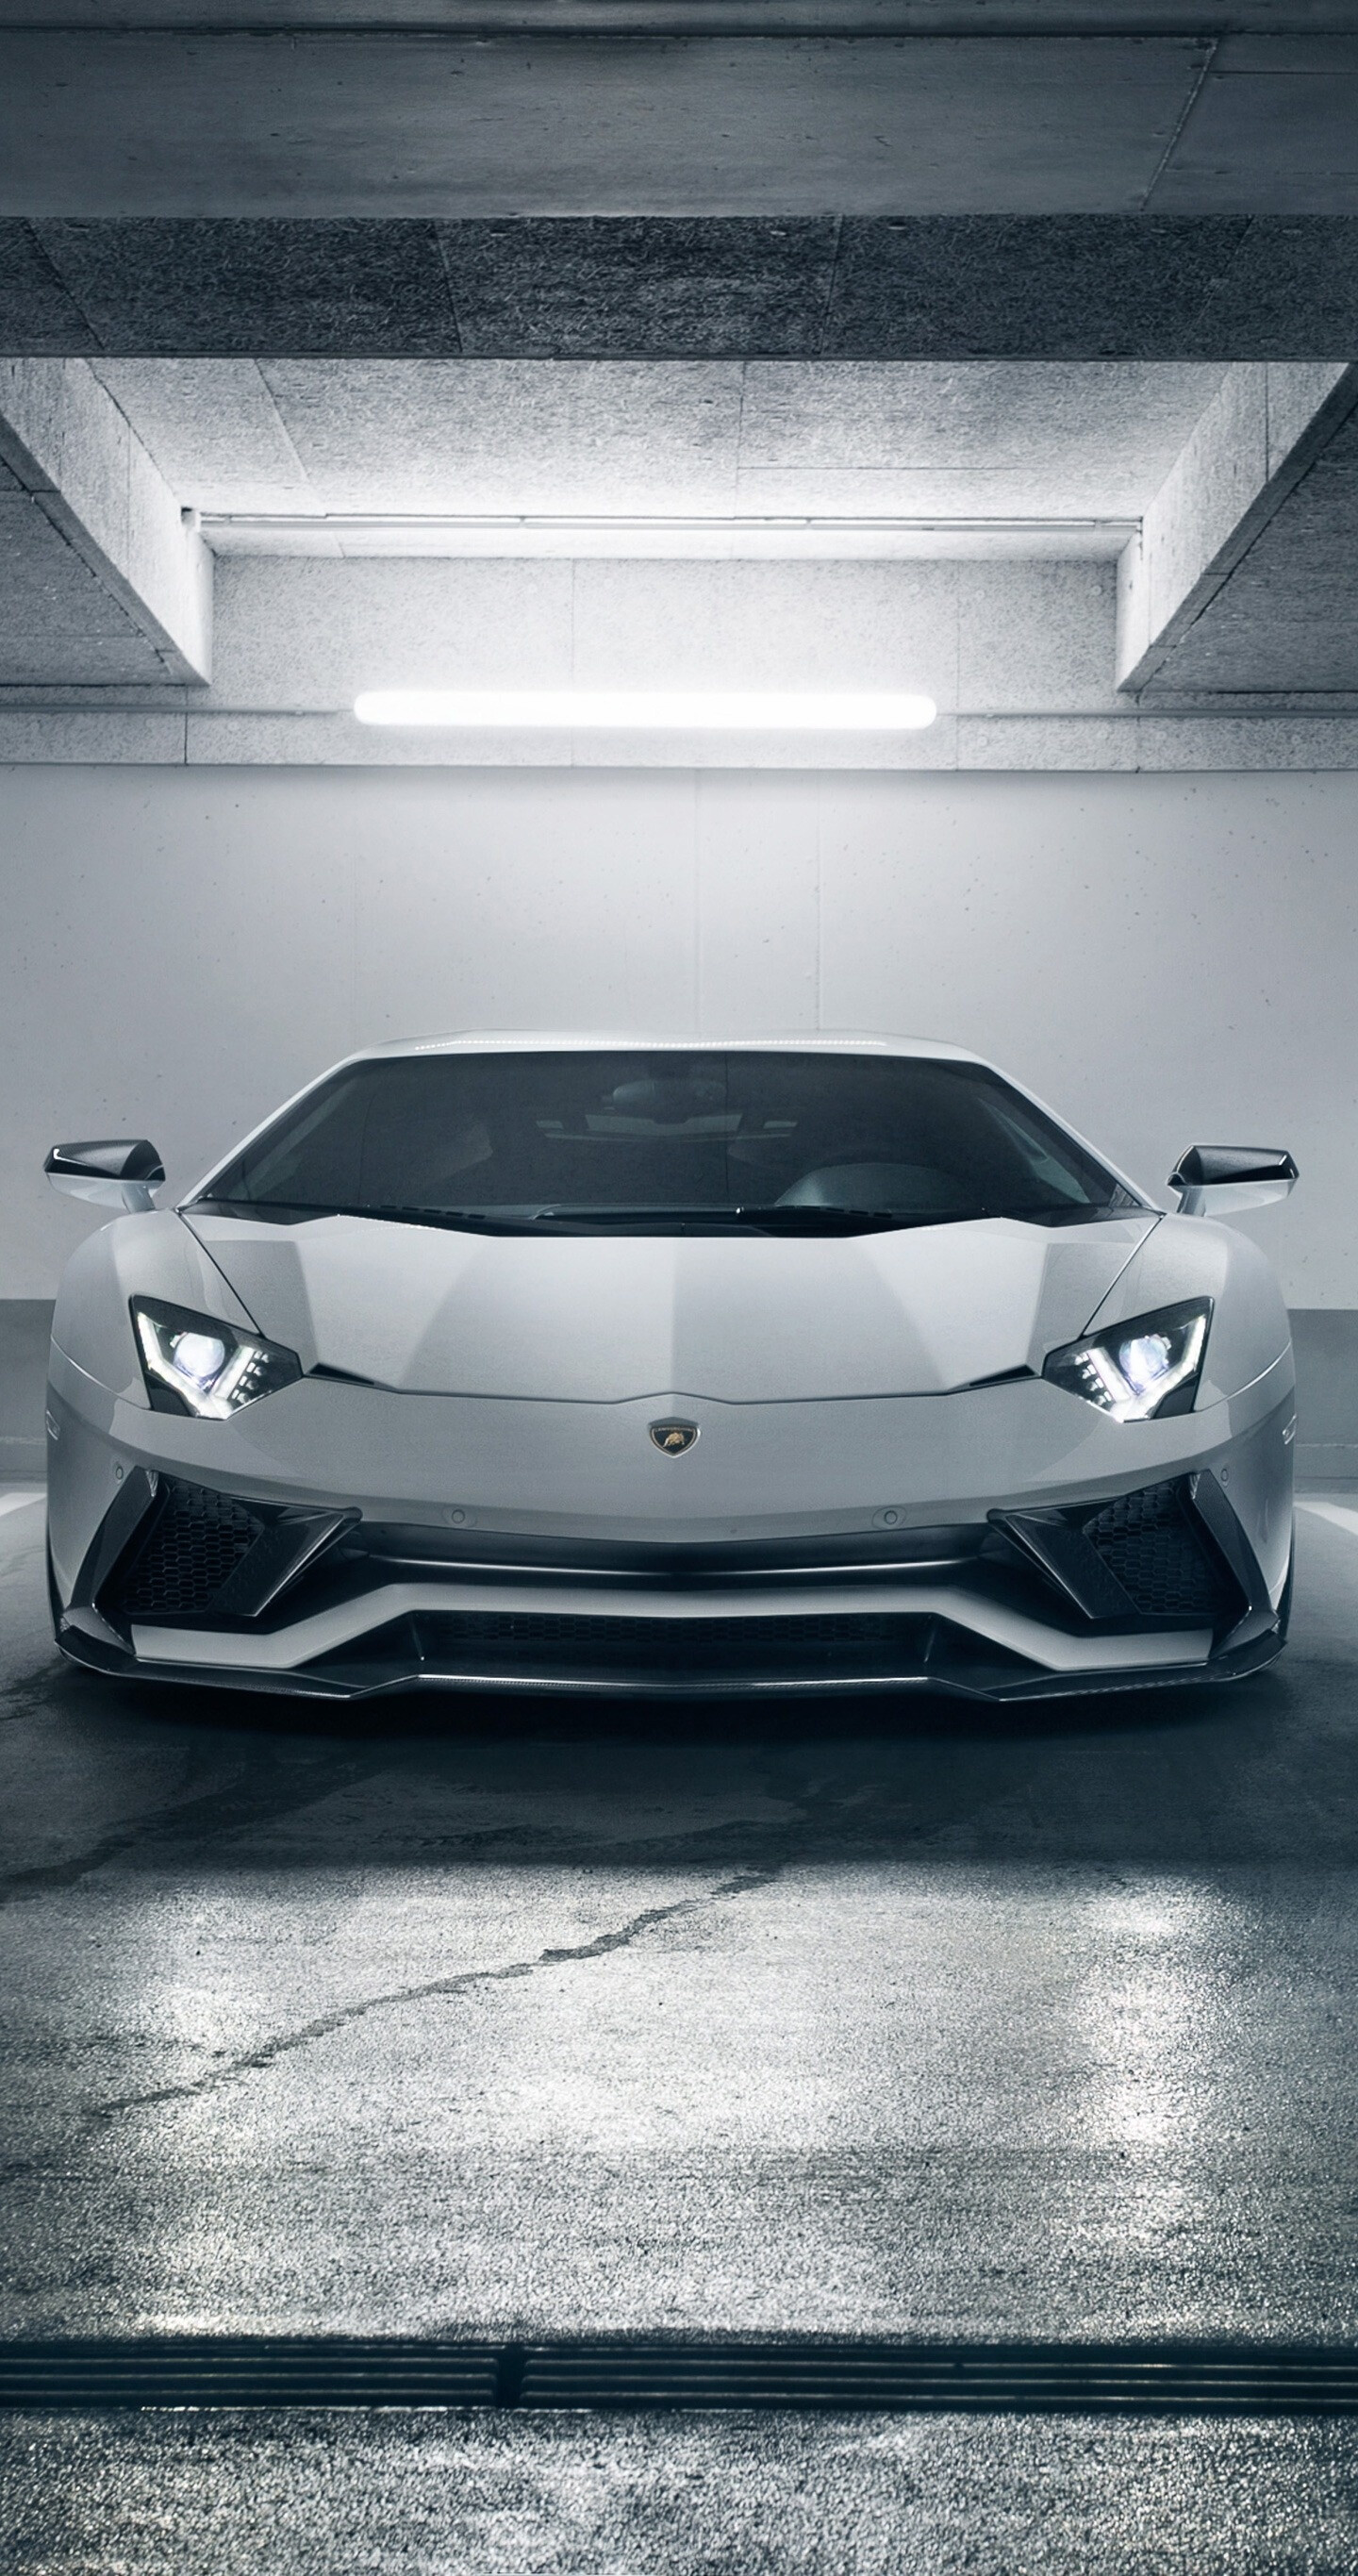 Lamborghini: Aventador S, Named after a Spanish fighting bull that fought in Zaragoza, Aragón in 1993. 1440x2740 HD Background.